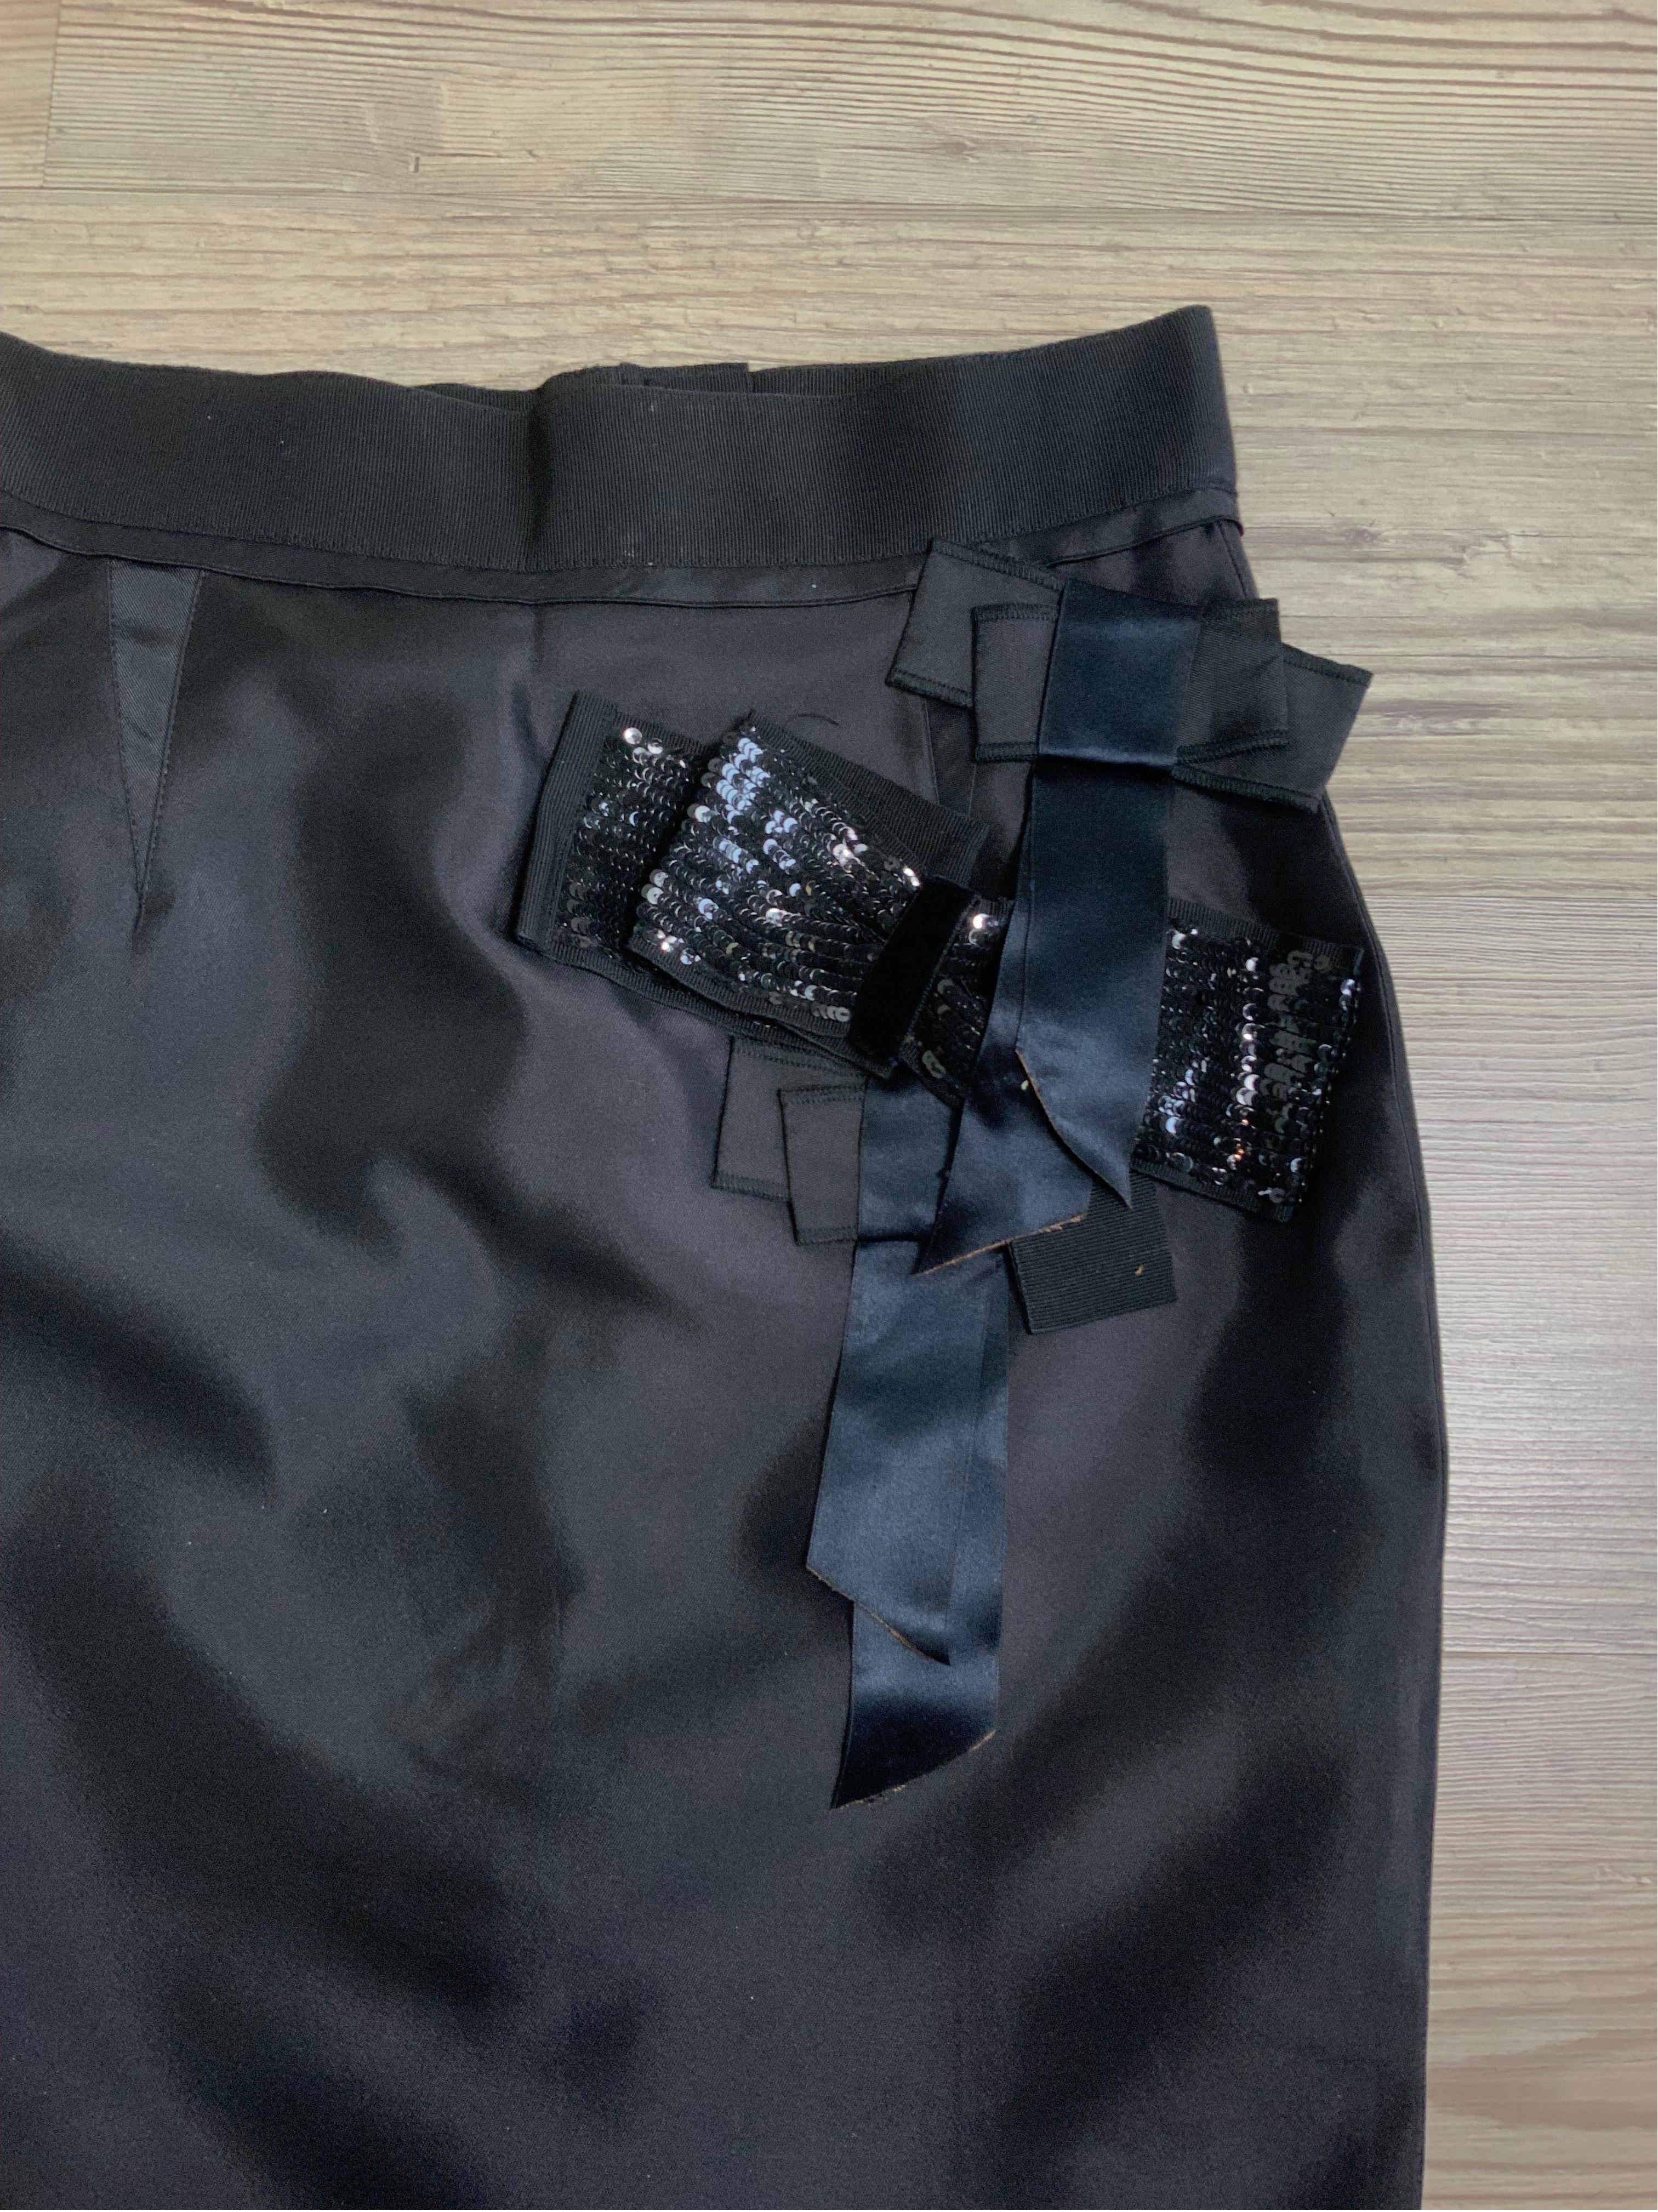 Dolce and Gabbana Black Skirt + jacket Suit For Sale 4